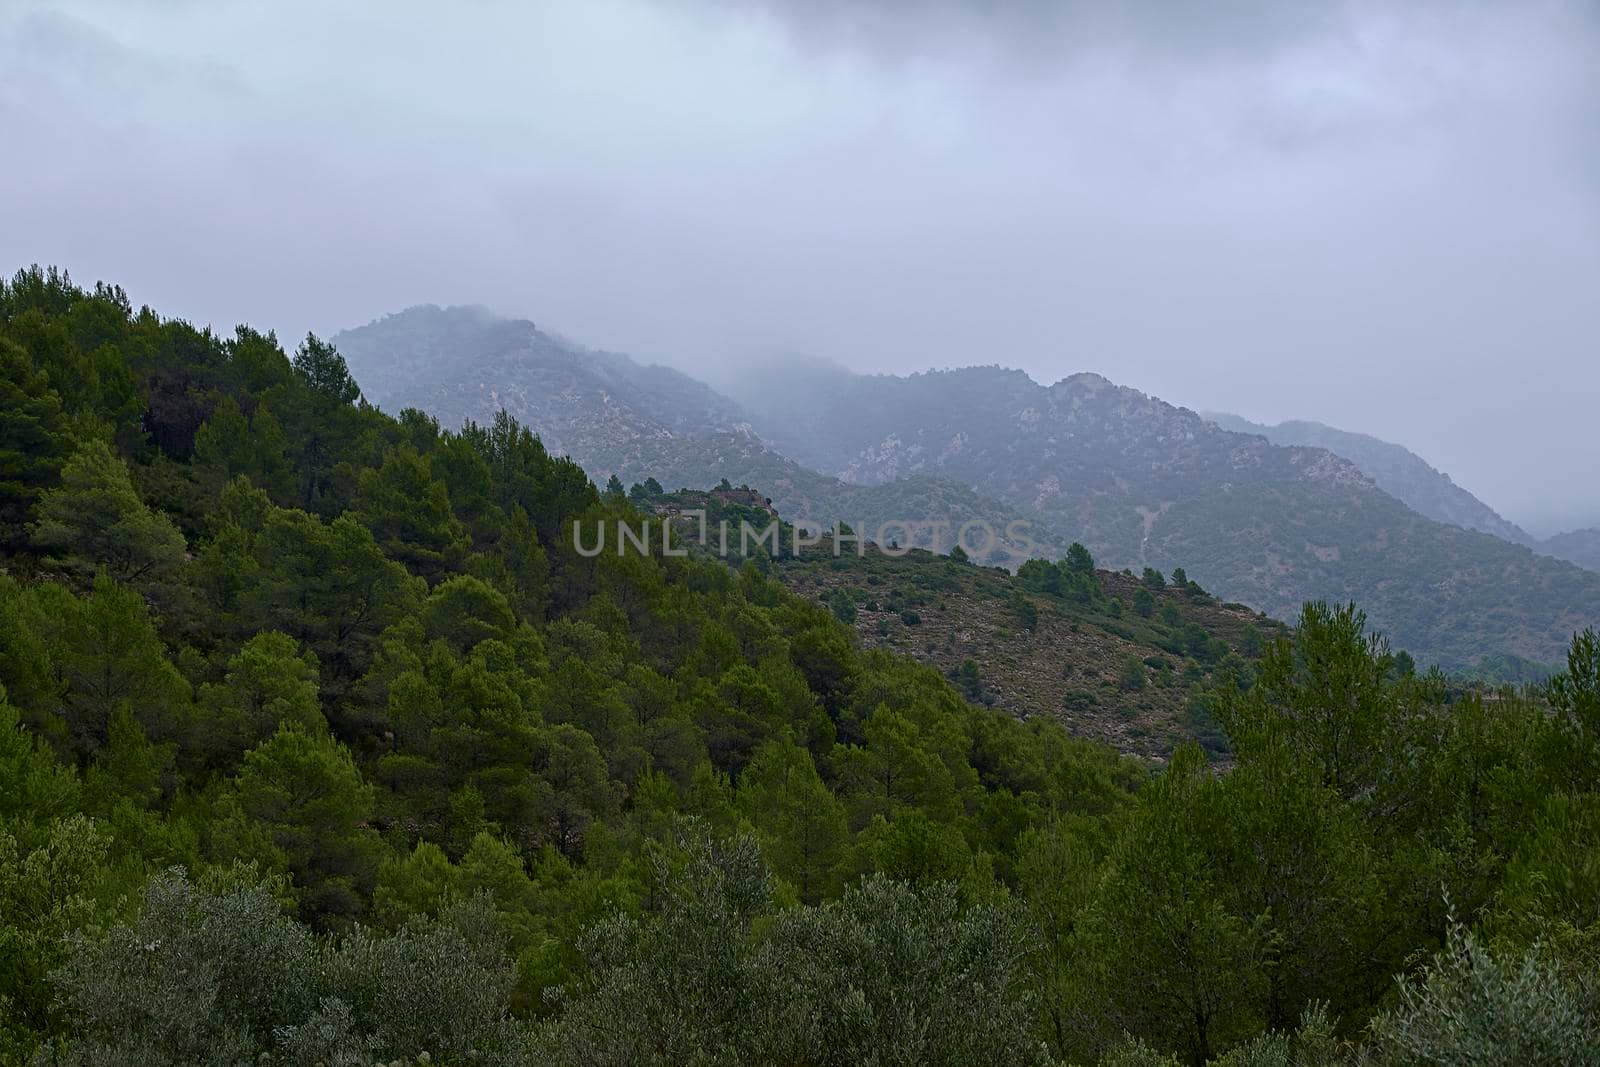 Mountain landscape surrounded by clouds and crop fields. Line composition, olive trees, low clouds, pines, greens, shades of green.